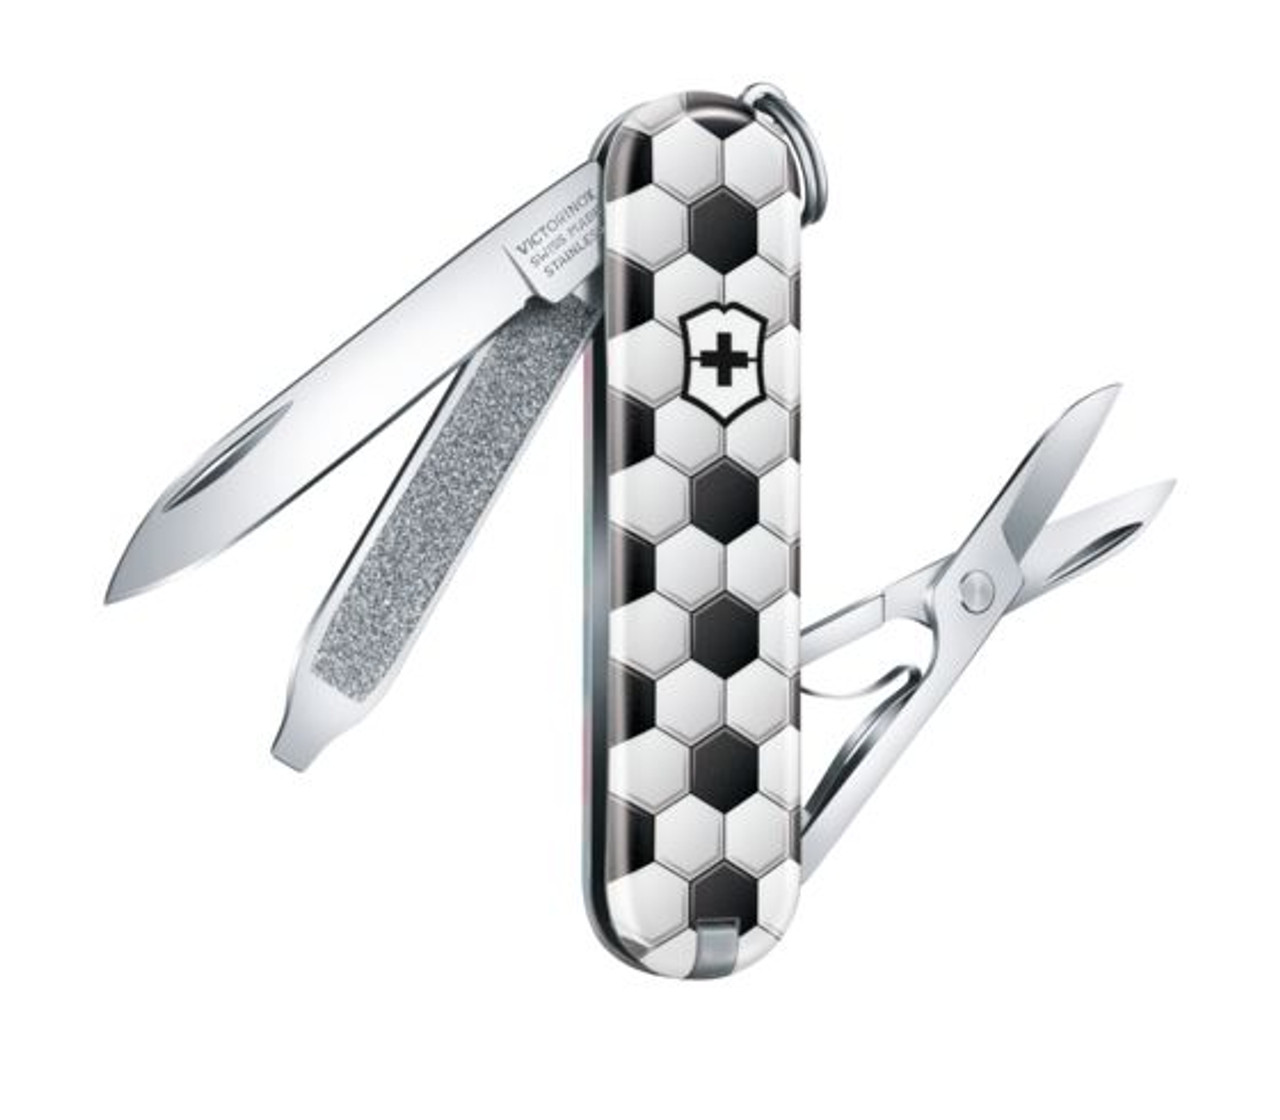 Victorinox Classic SD 2020 Limited Edition 0.6223.L2007, 2.25 Soccer ABS Handle